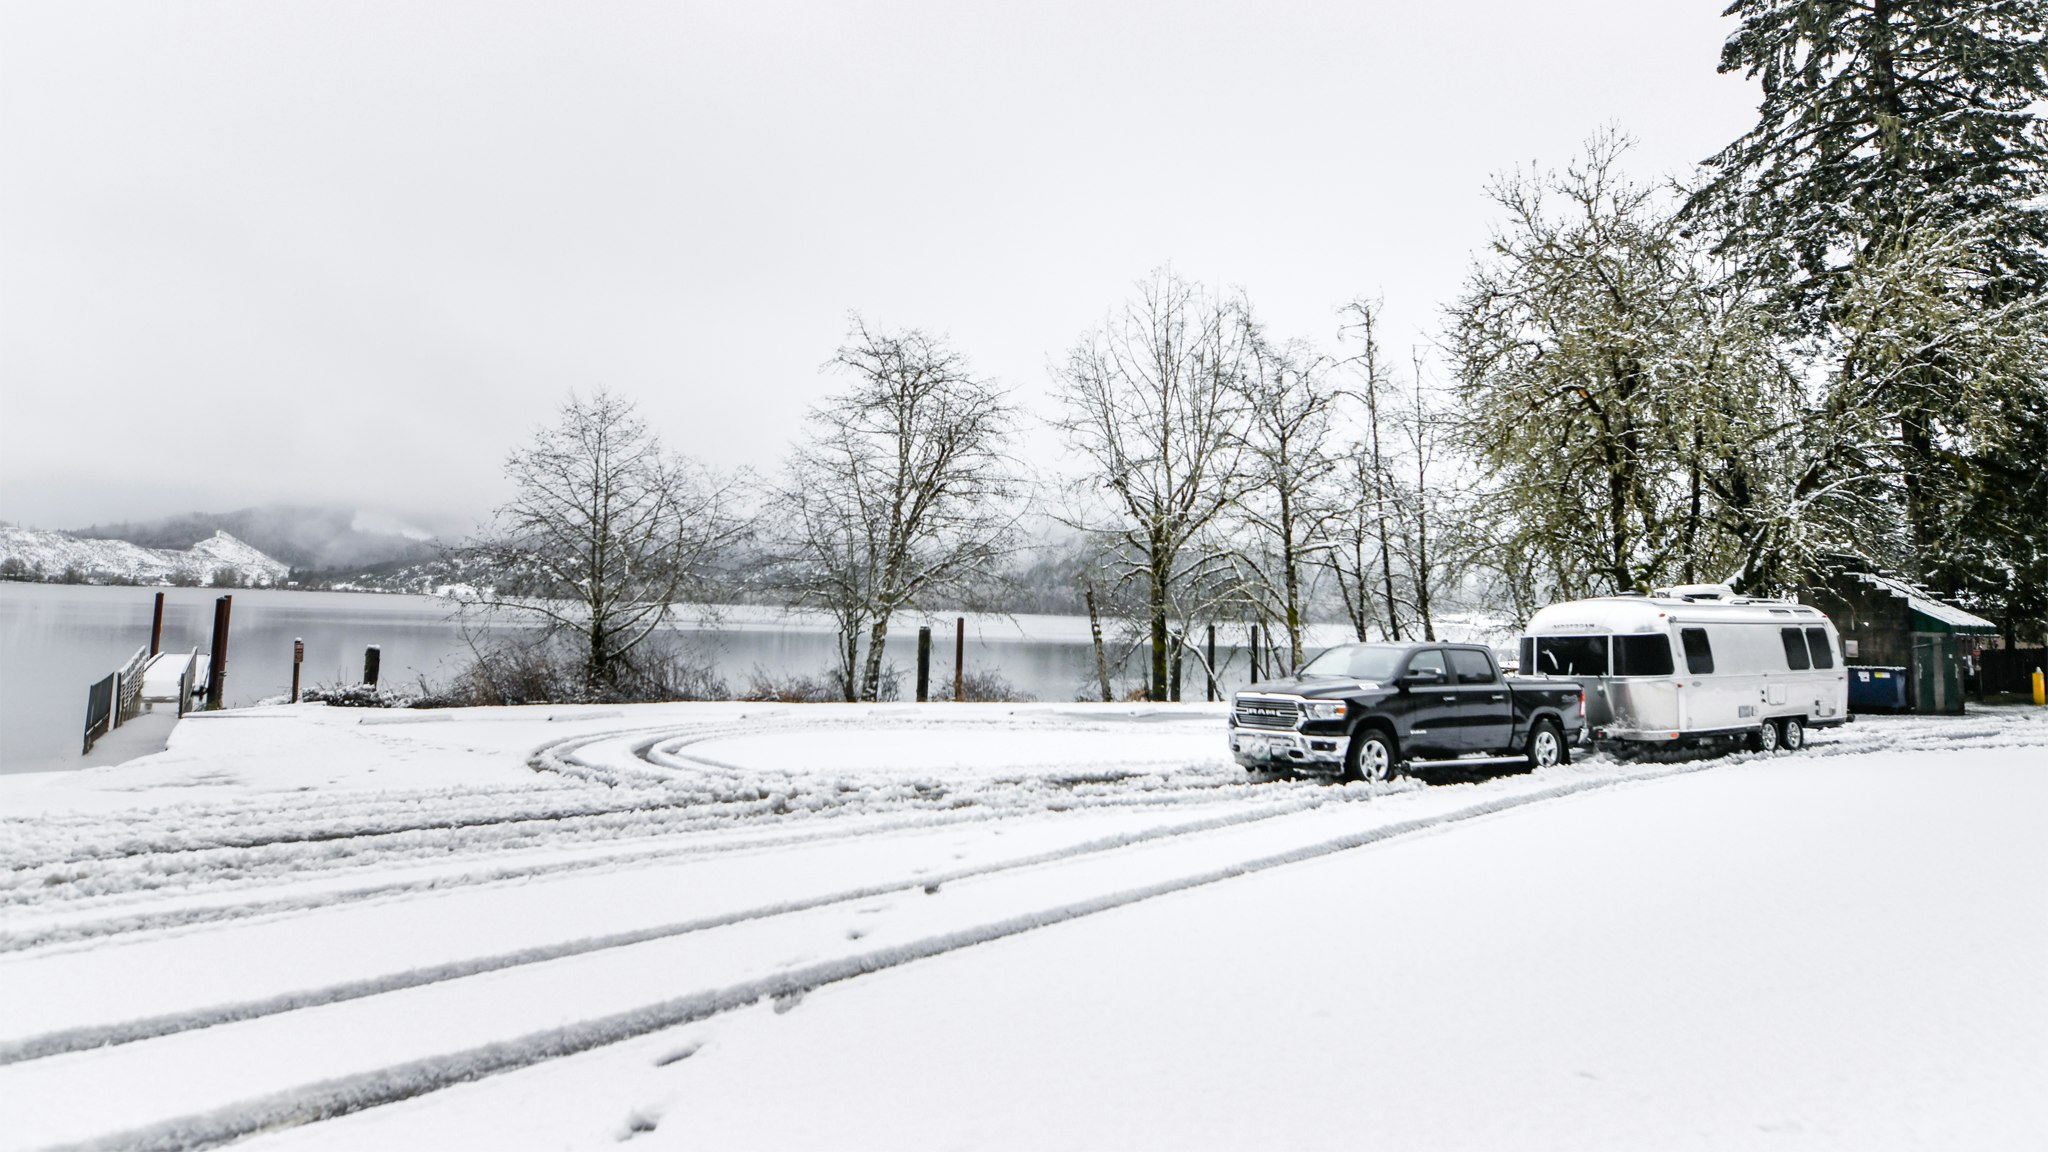 Vehicle Accessories for Safety in Winter Driving - Colorado Coach